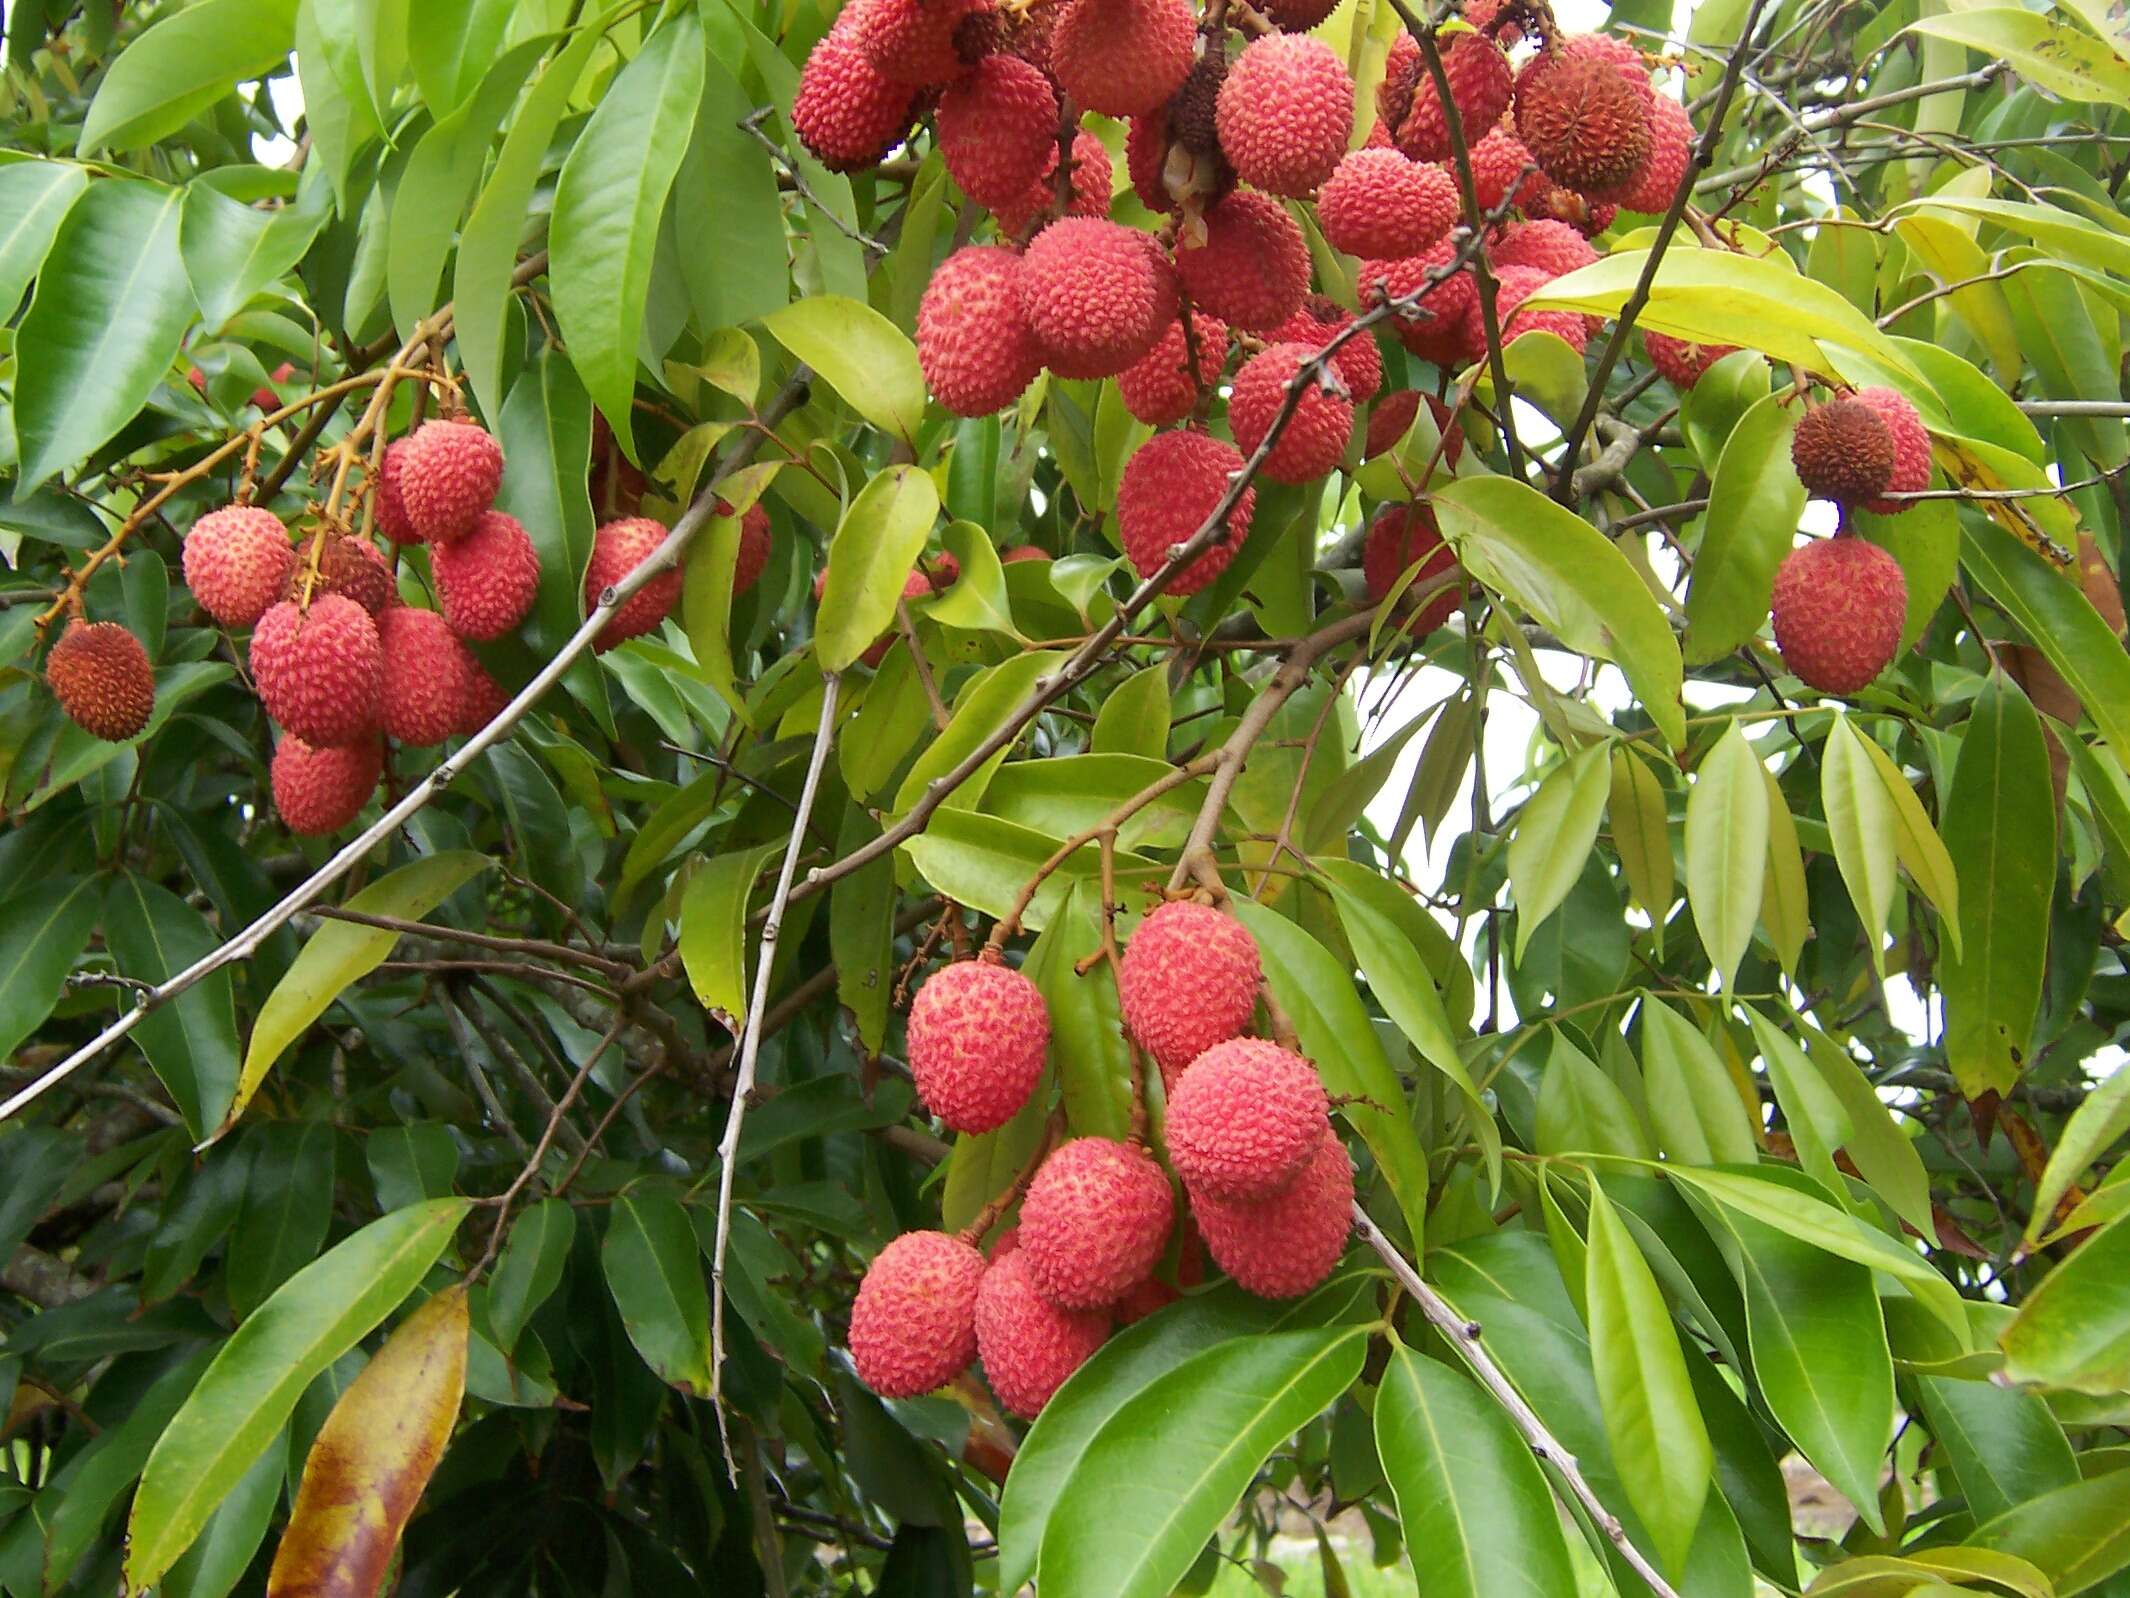 Image of lychee